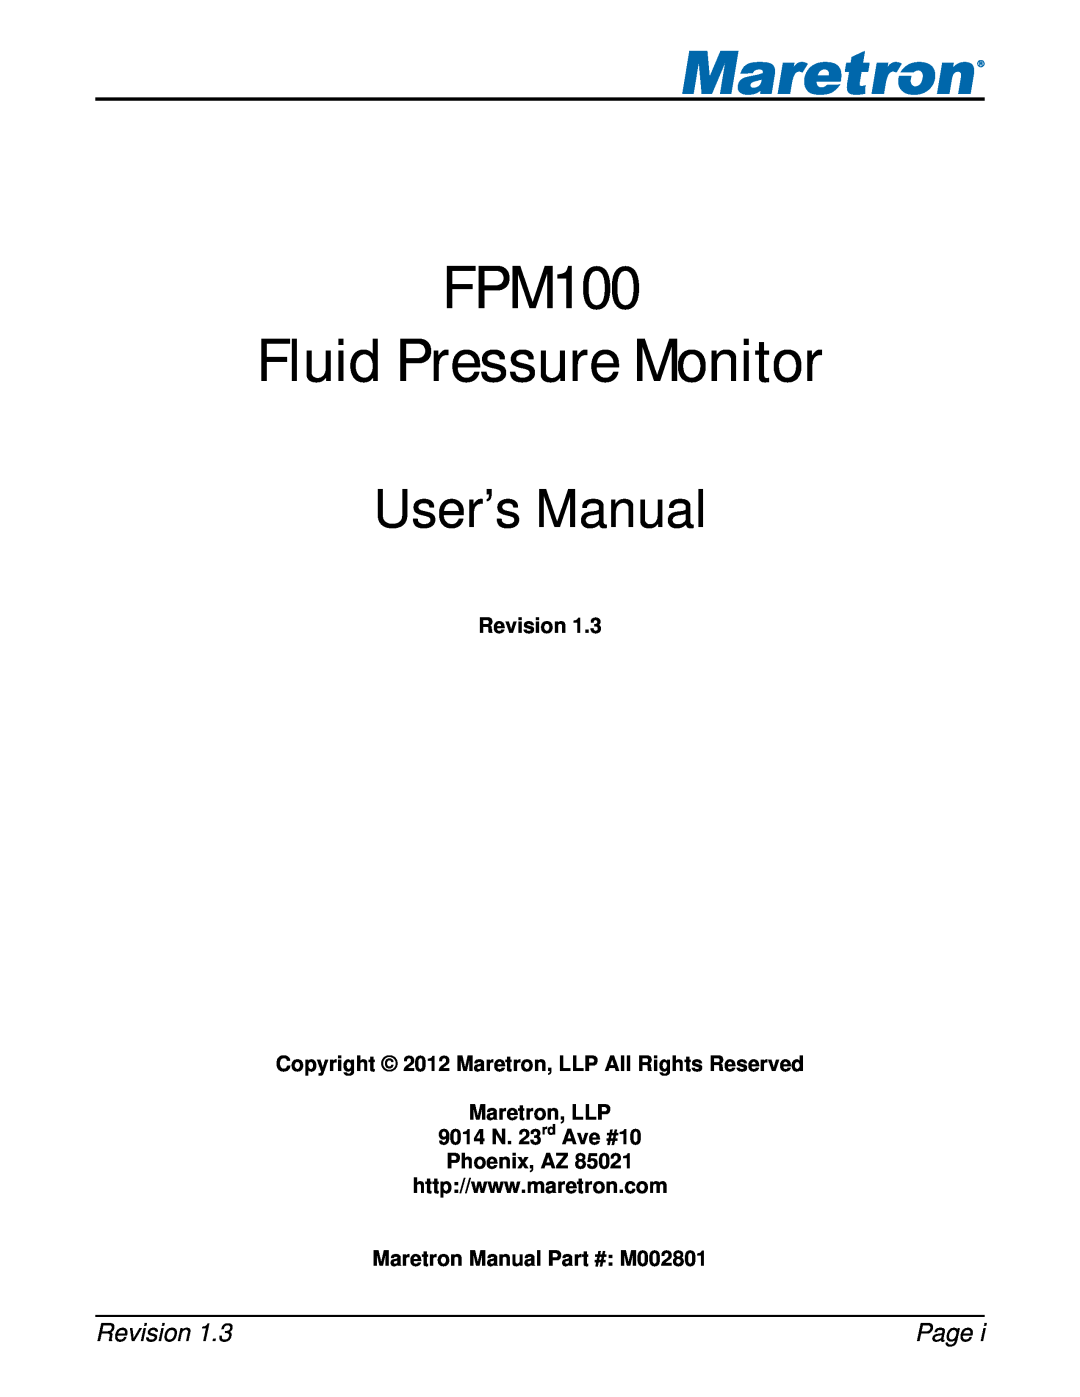 Maretron FPM100 user manual Page, Revision Copyright 2012 Maretron, LLP All Rights Reserved, Maretron Manual M002801 